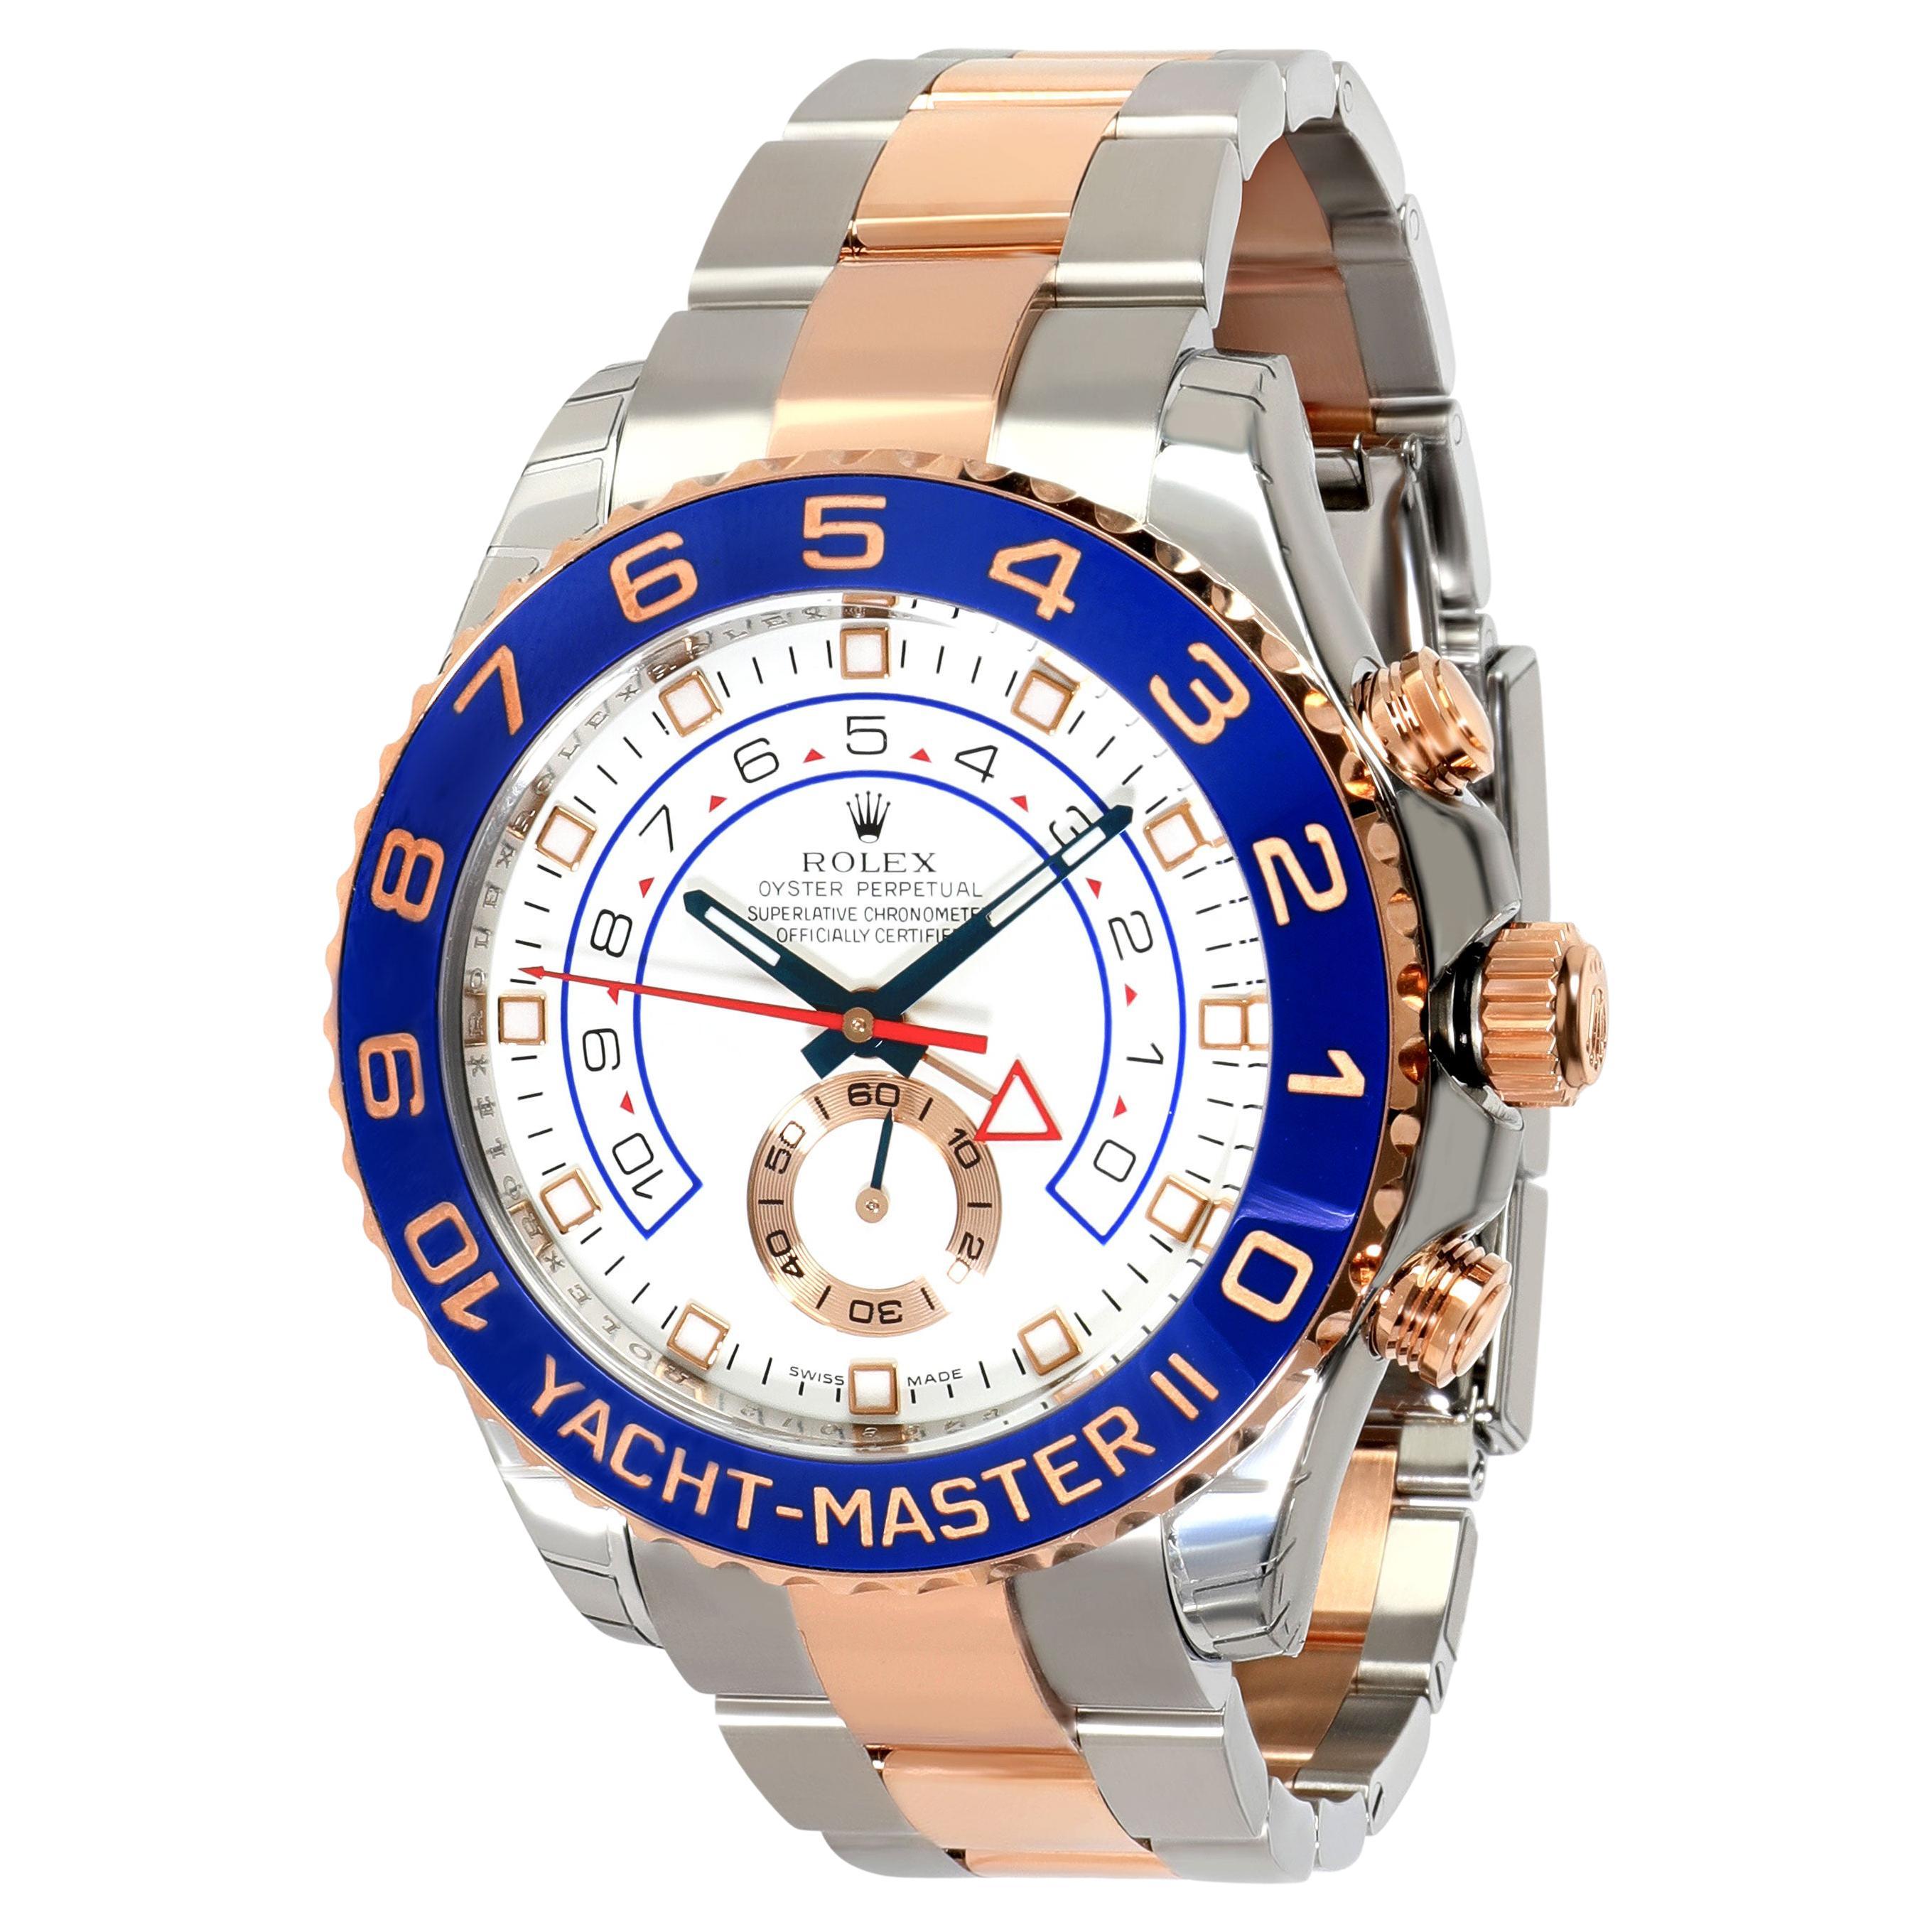 Rolex Yachtmaster II 116681 Men's Watch in 18kt Stainless Steel / Rose Gold